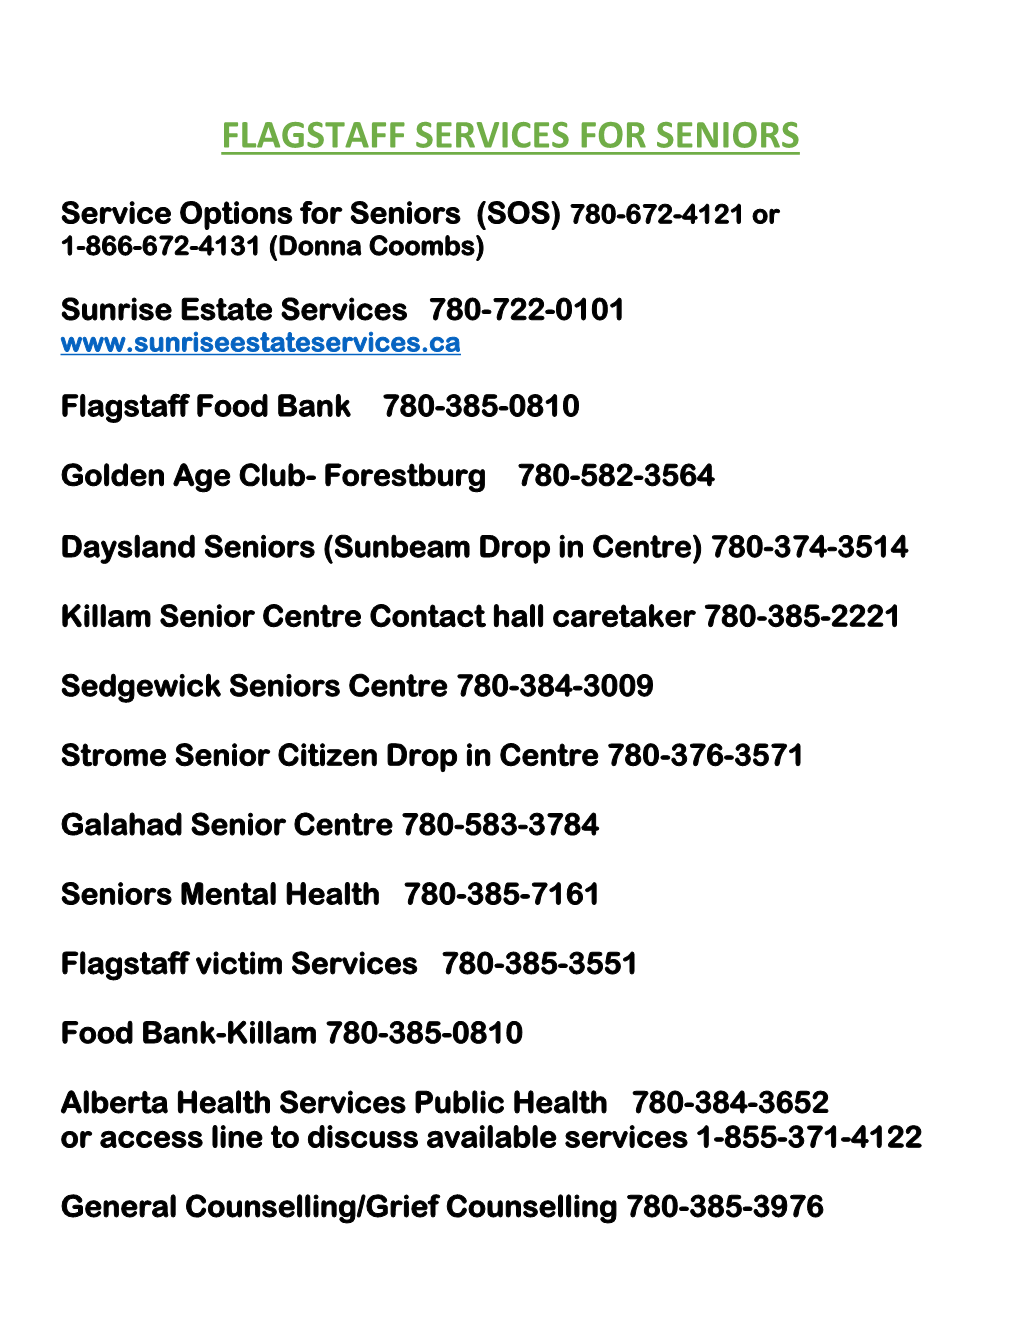 Flagstaff Services for Seniors